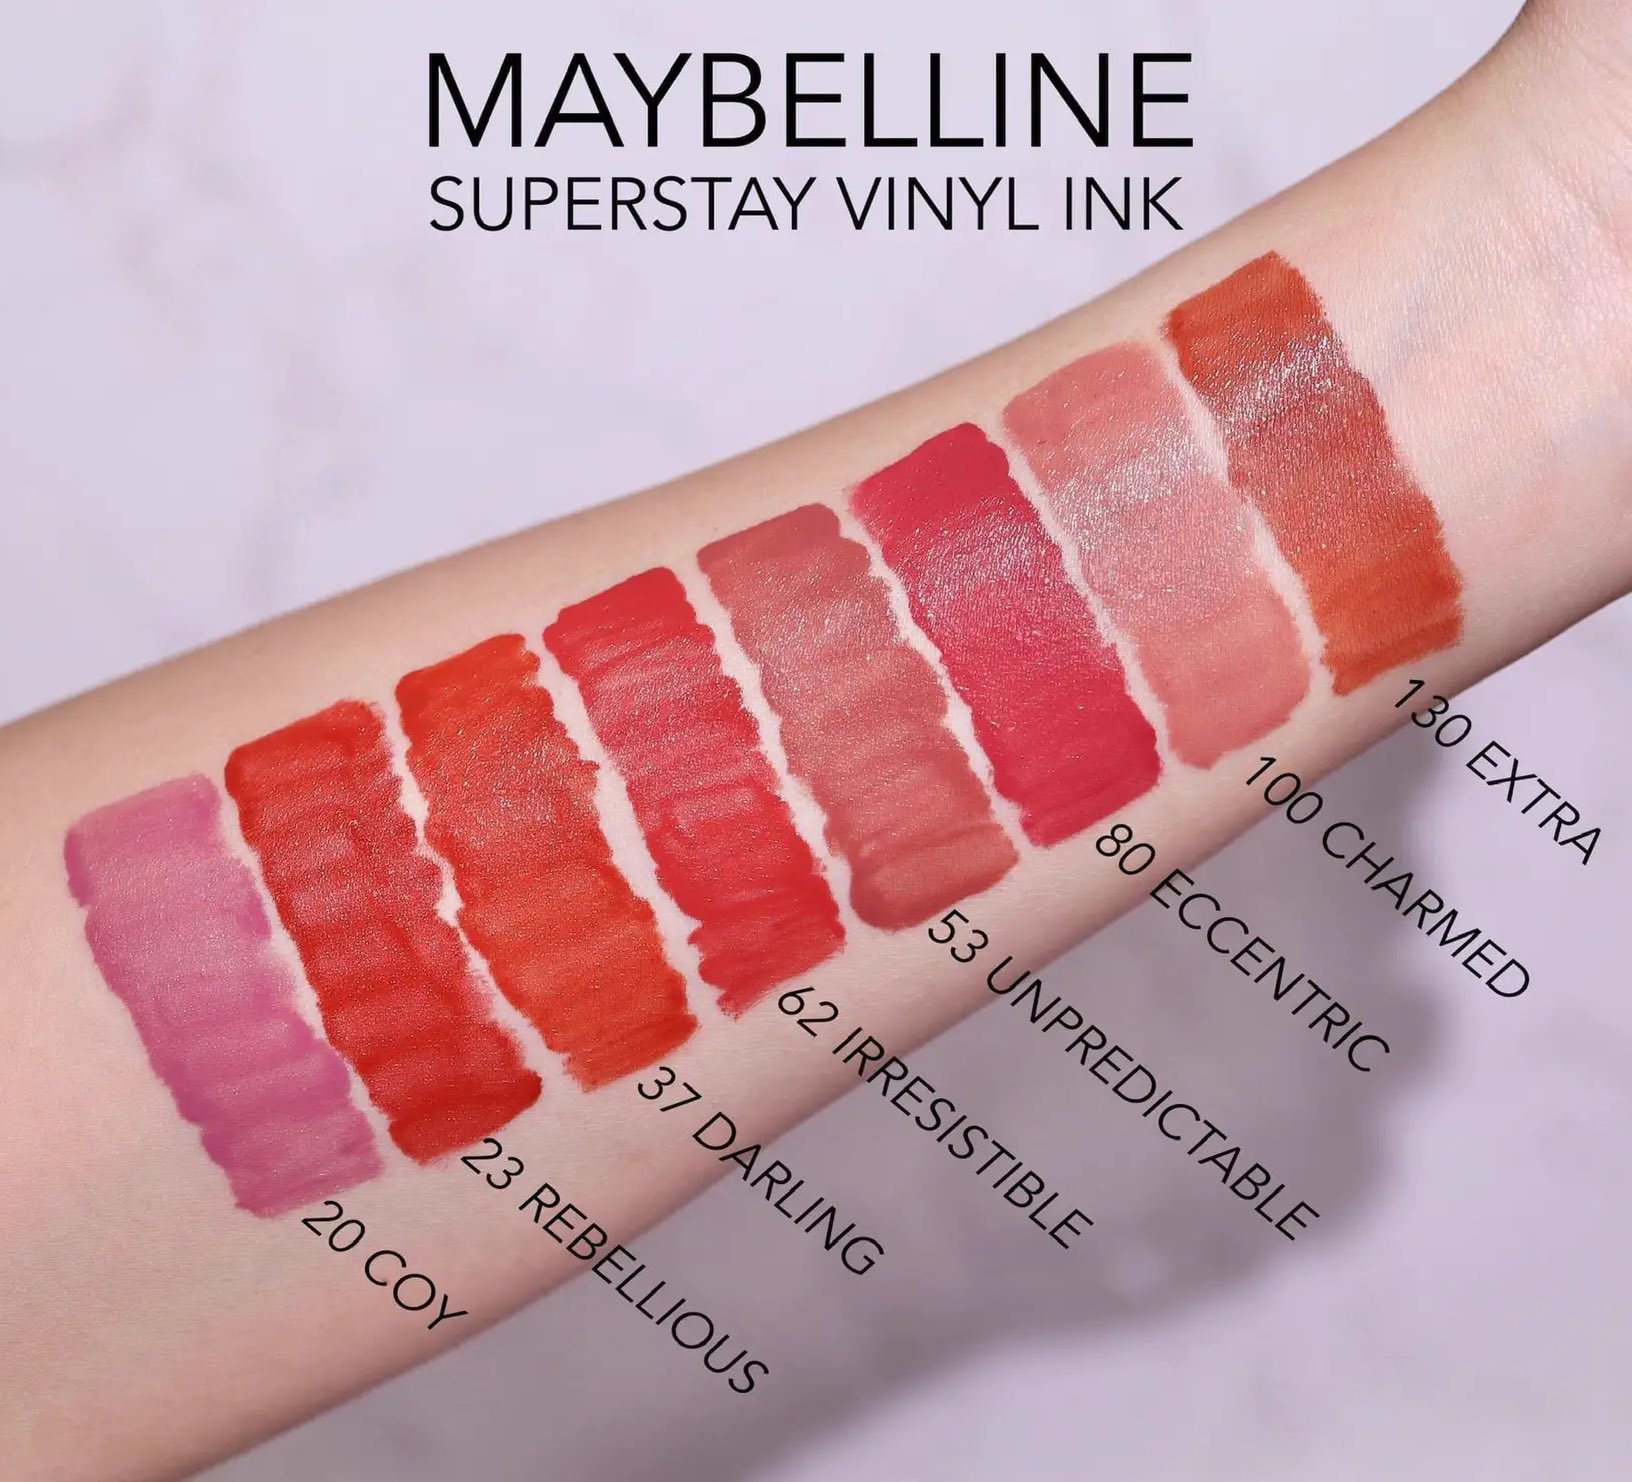 SWATCH] Maybelline Superstay Vinyl Ink!, Gallery posted by Nabel